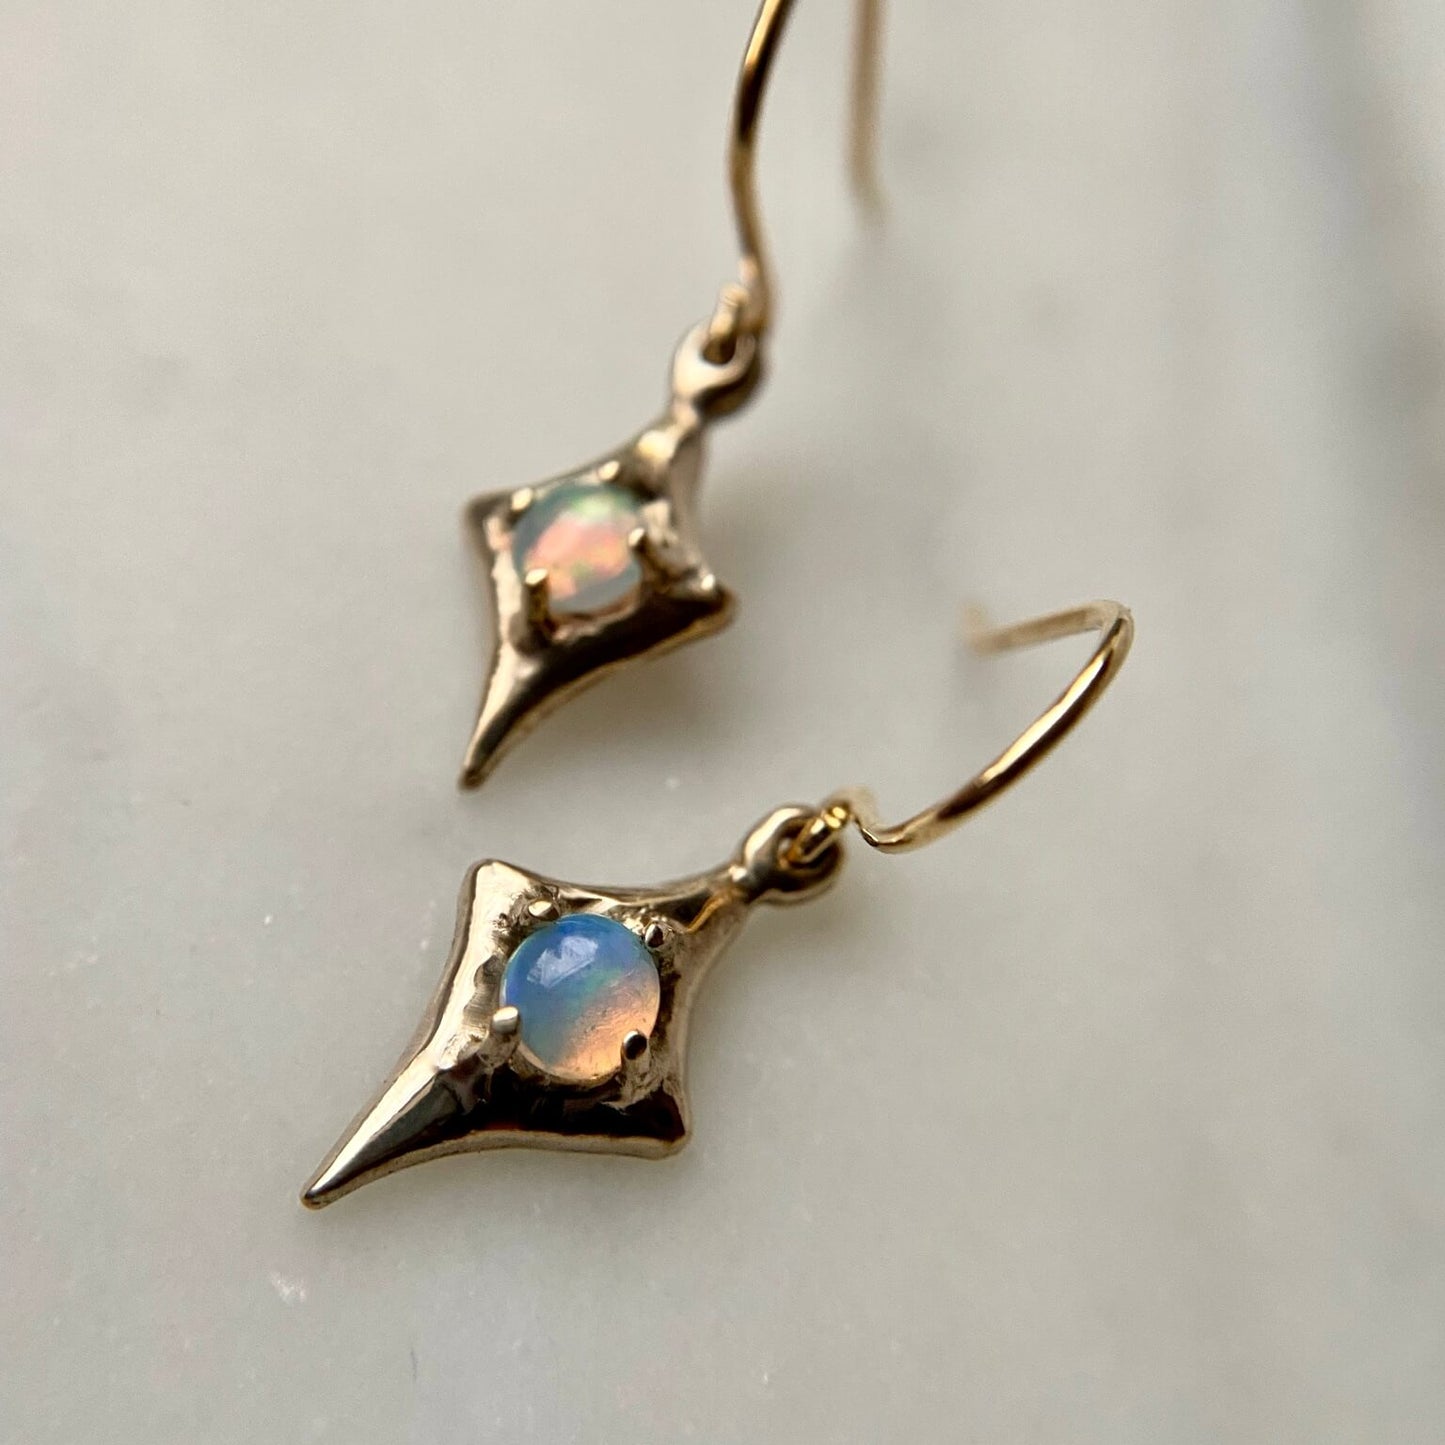 Close up of Four point star earrings from Iron Oxide Designs set with 4mm natural opals